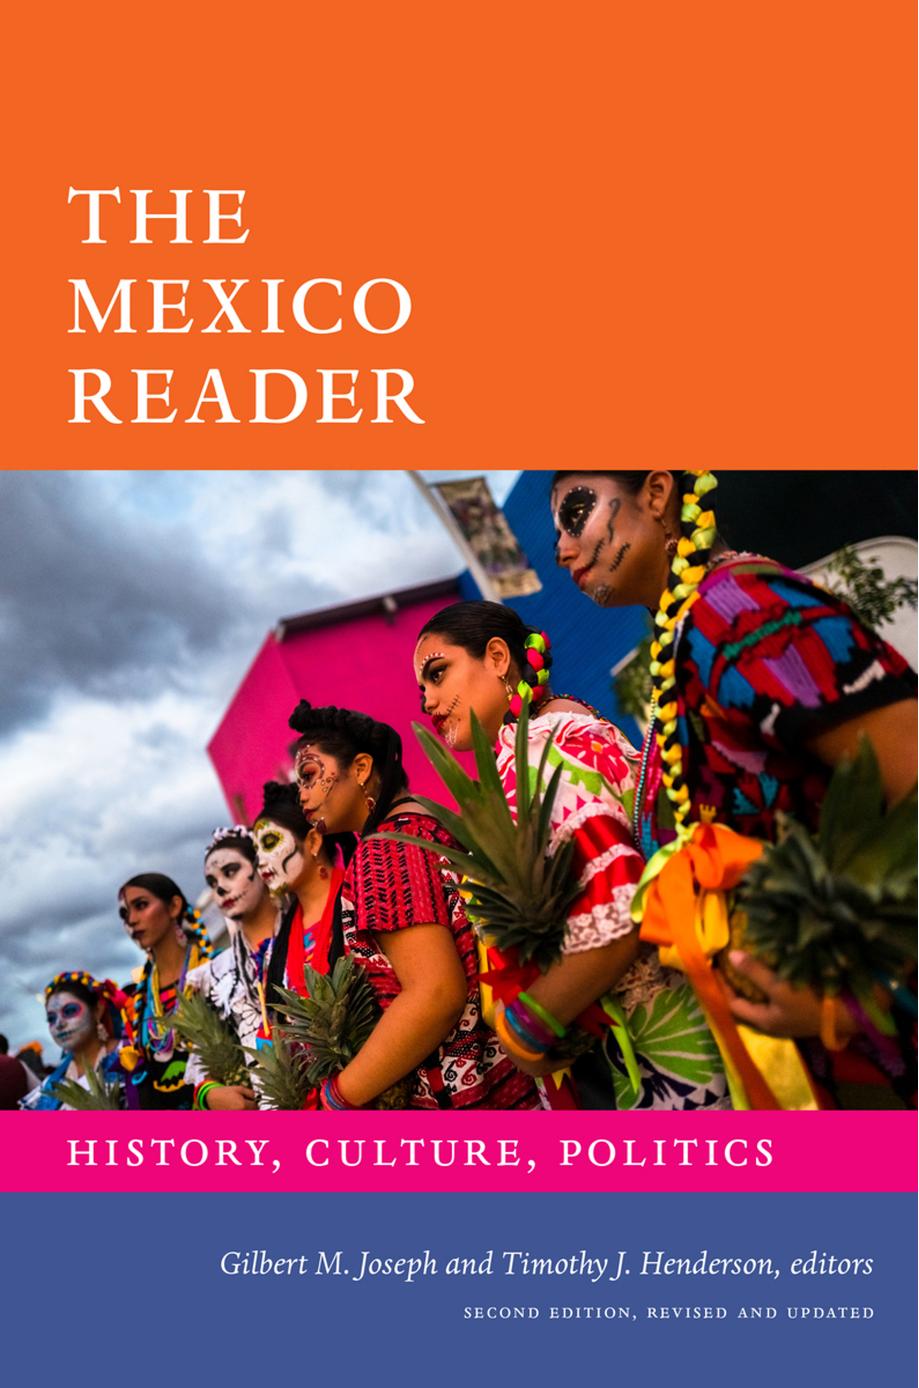 The Mexico Reader: History, Culture, Politics by Gilbert M. Joseph Timothy J. Henderson (eds.)